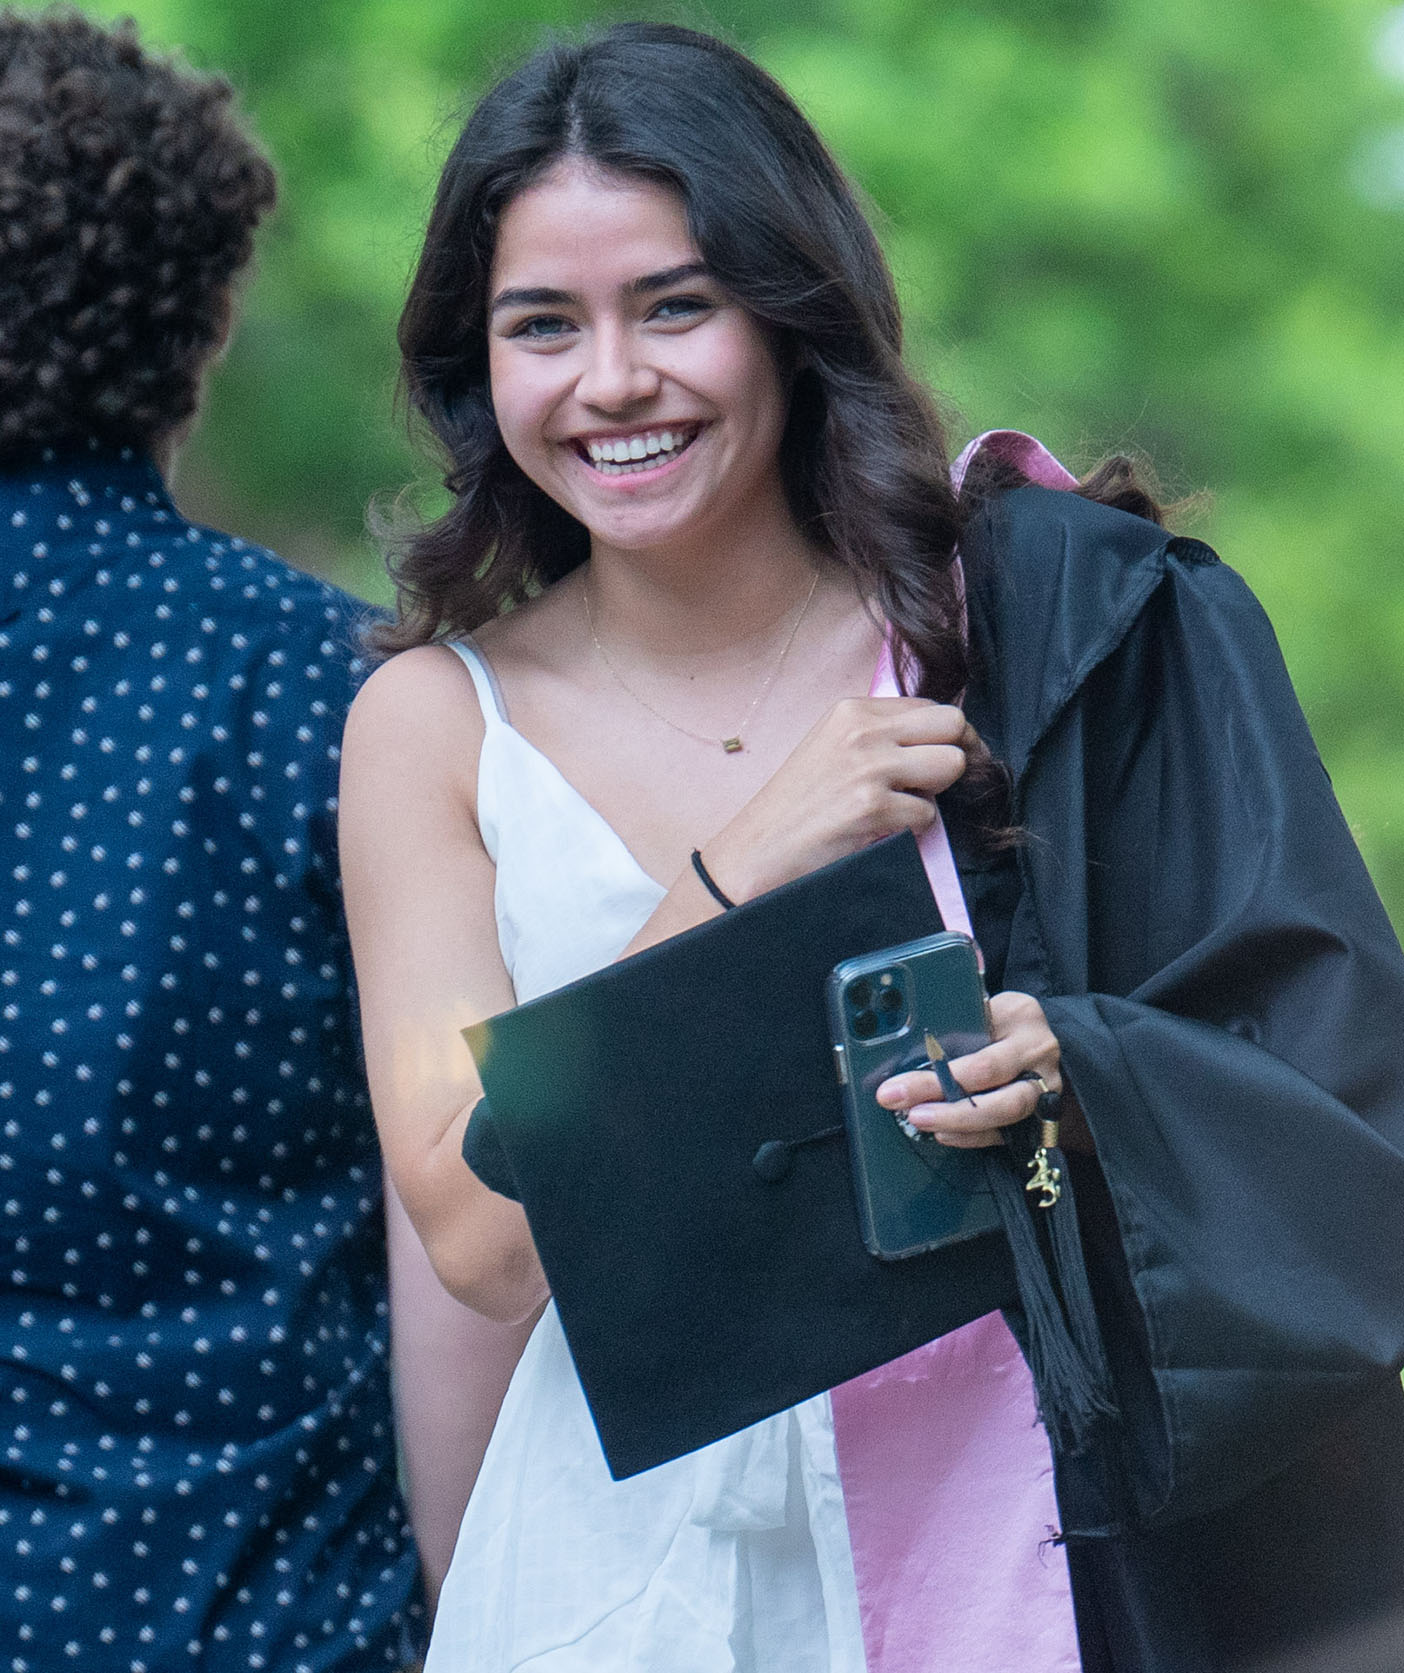 A graduating student walks down a walkway with a warm smile on her face